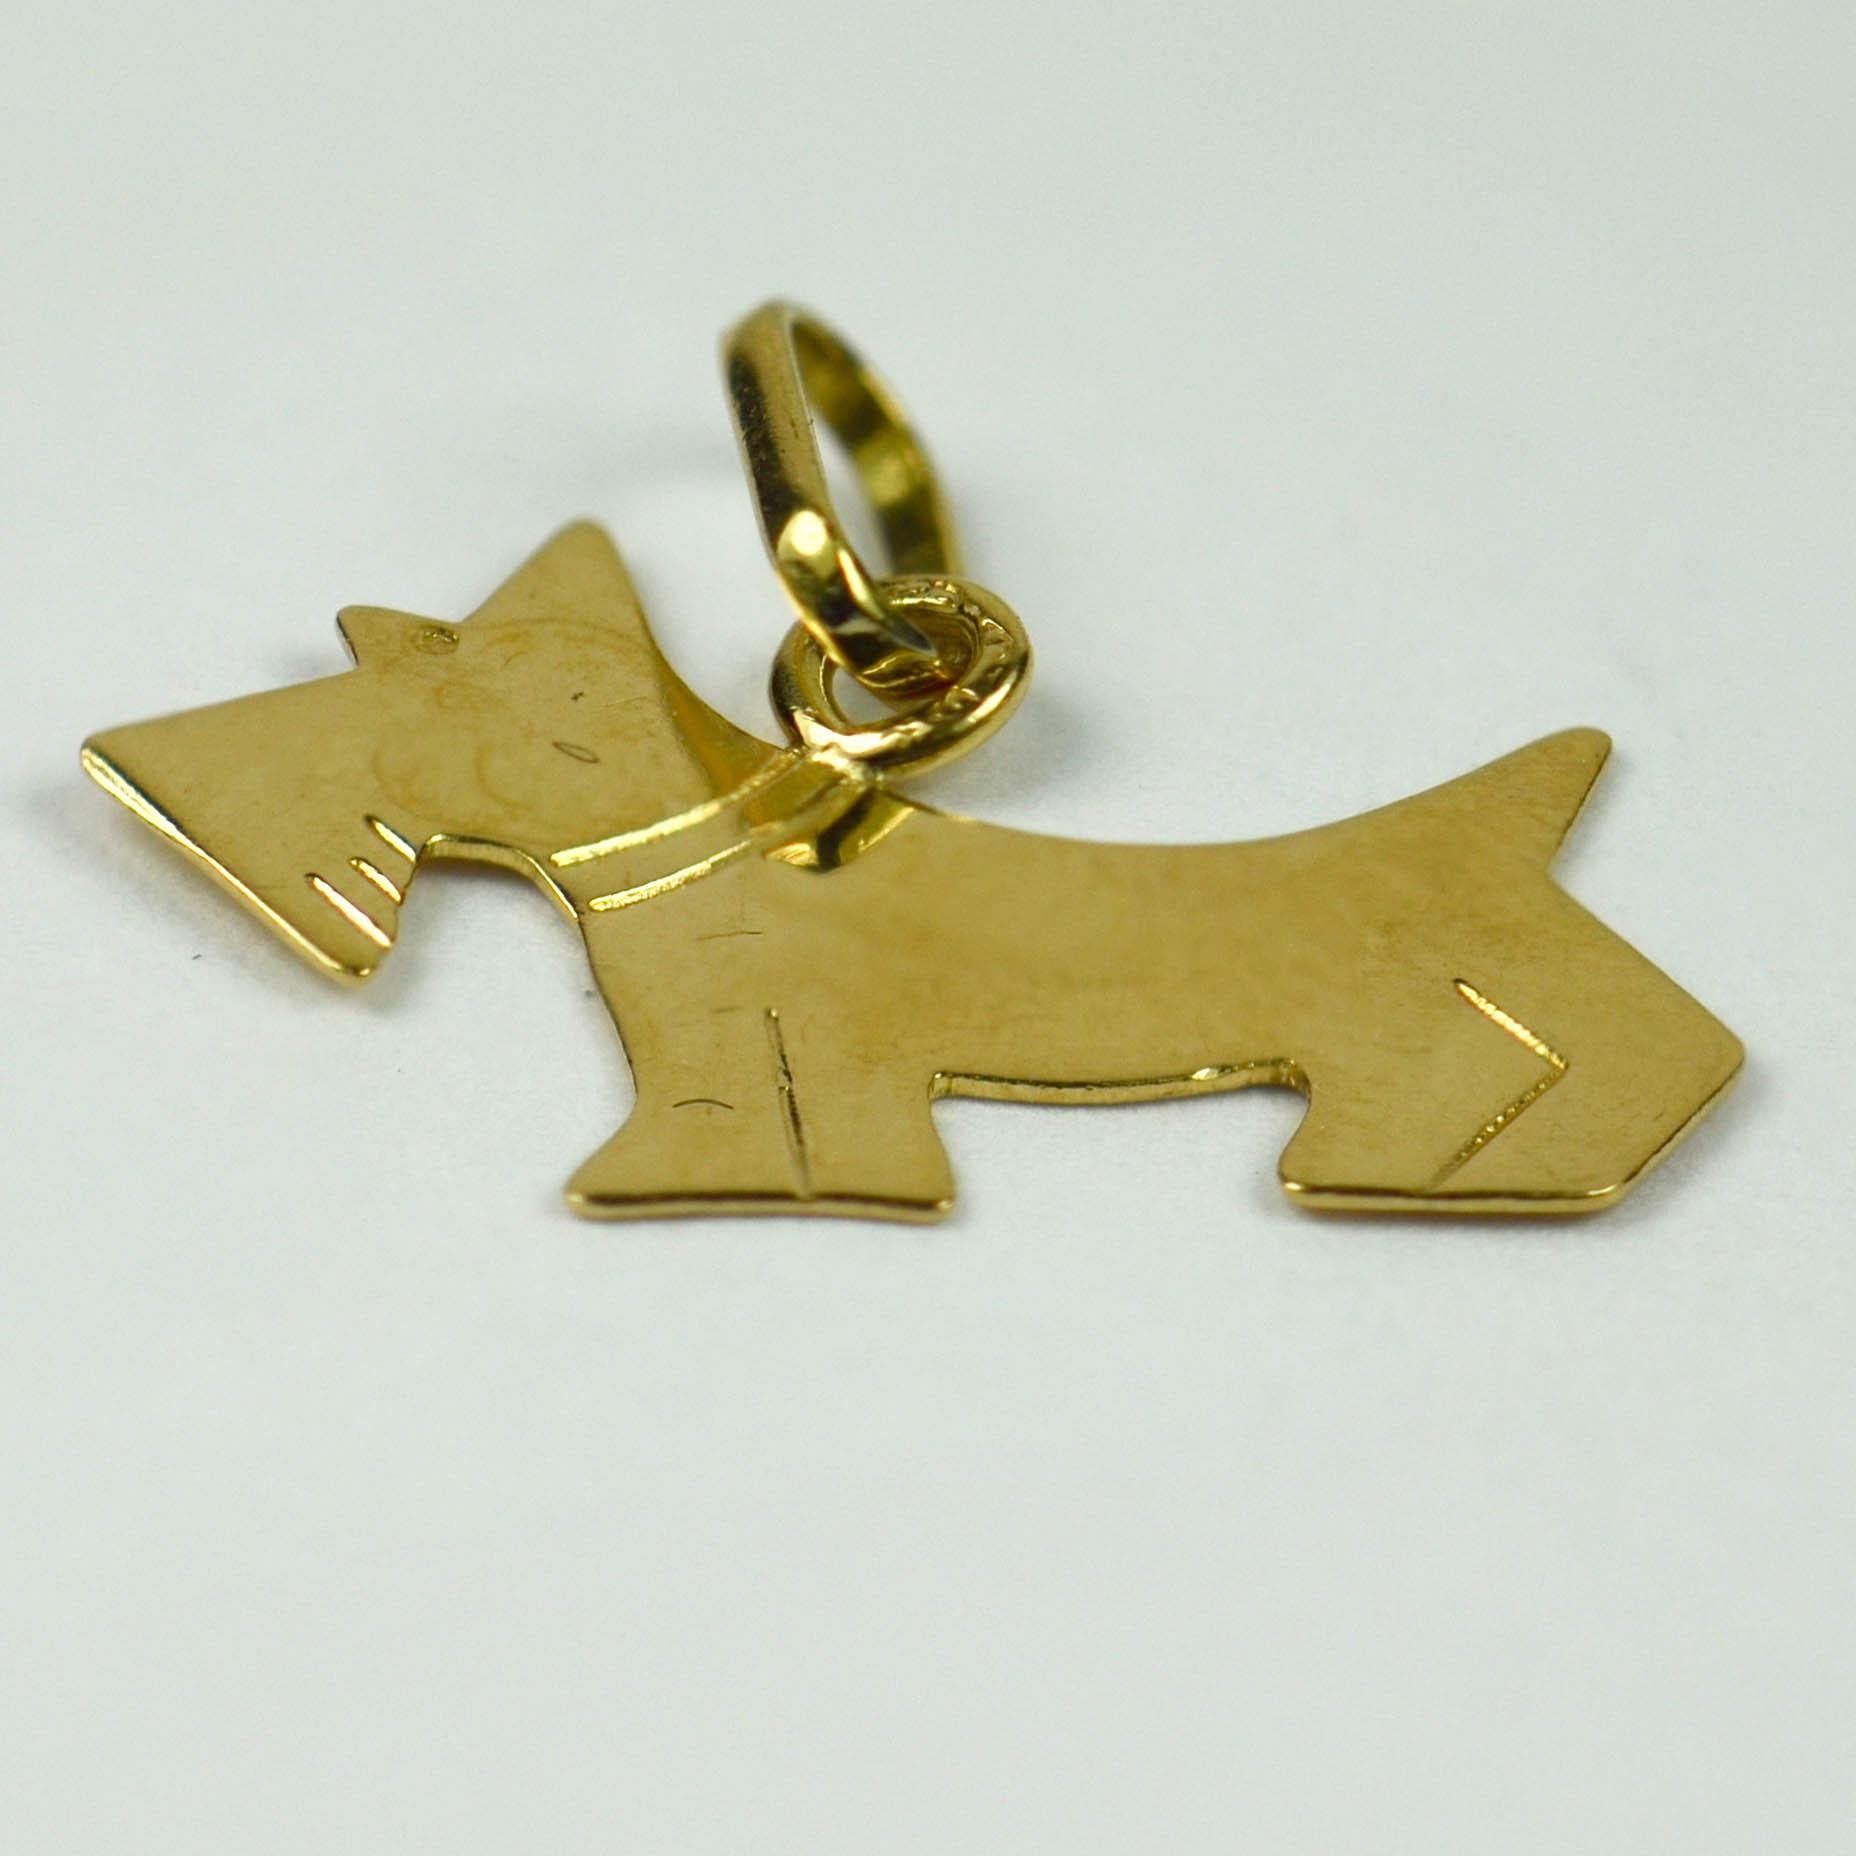 An 18 karat (18K) yellow gold charm pendant designed as the profile of a Terrier or Scottie breed of dog. Stamped with the eagle's head for French manufacture and 18 karat gold.

Dimensions: 1.5 x 1.8 x 0.1 cm
Weight: 0.56 grams